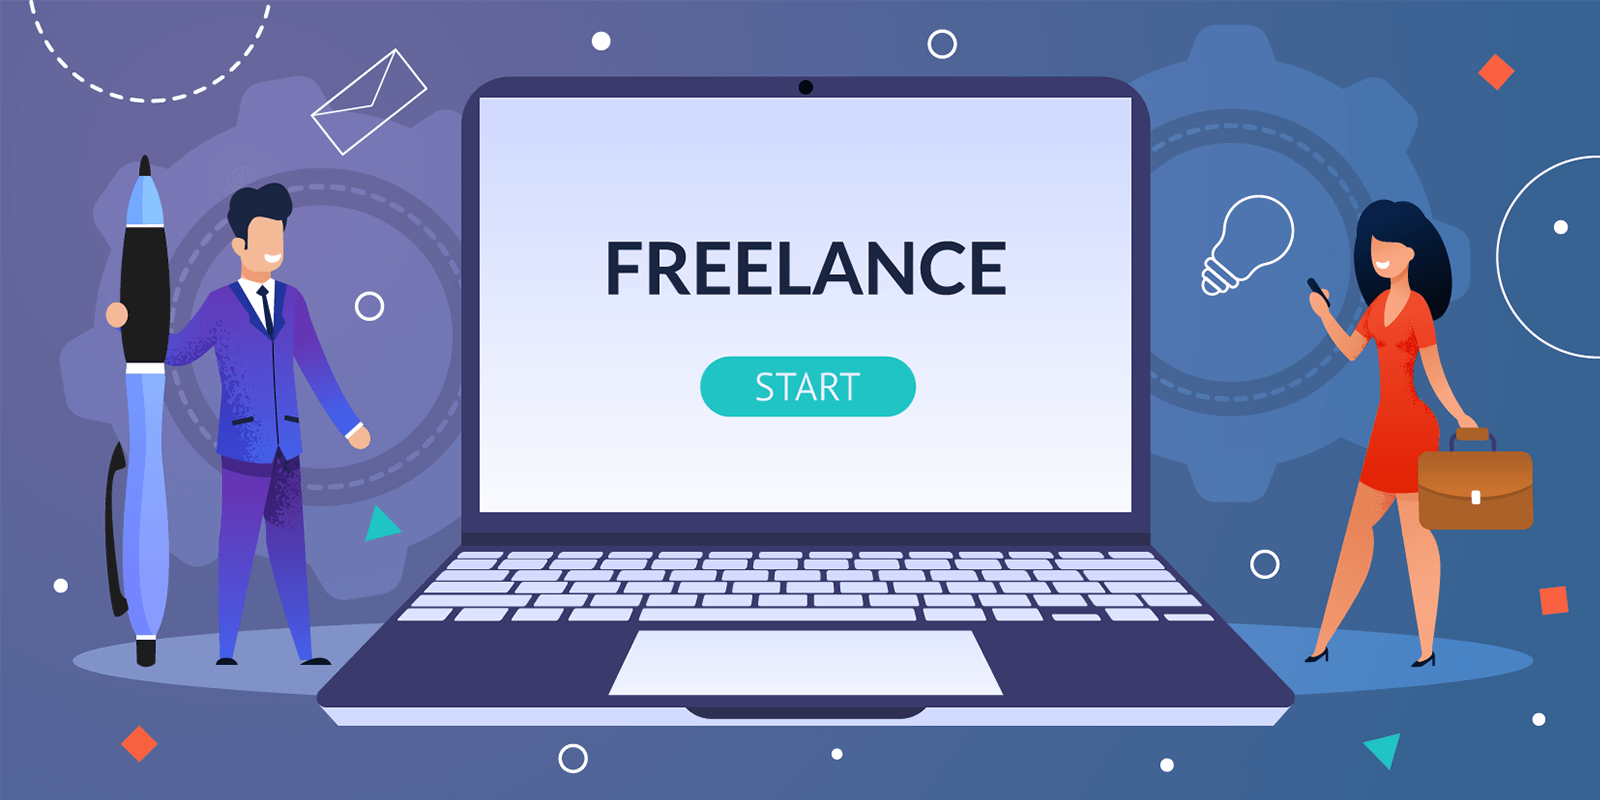 9 things you need to start a successful freelance career